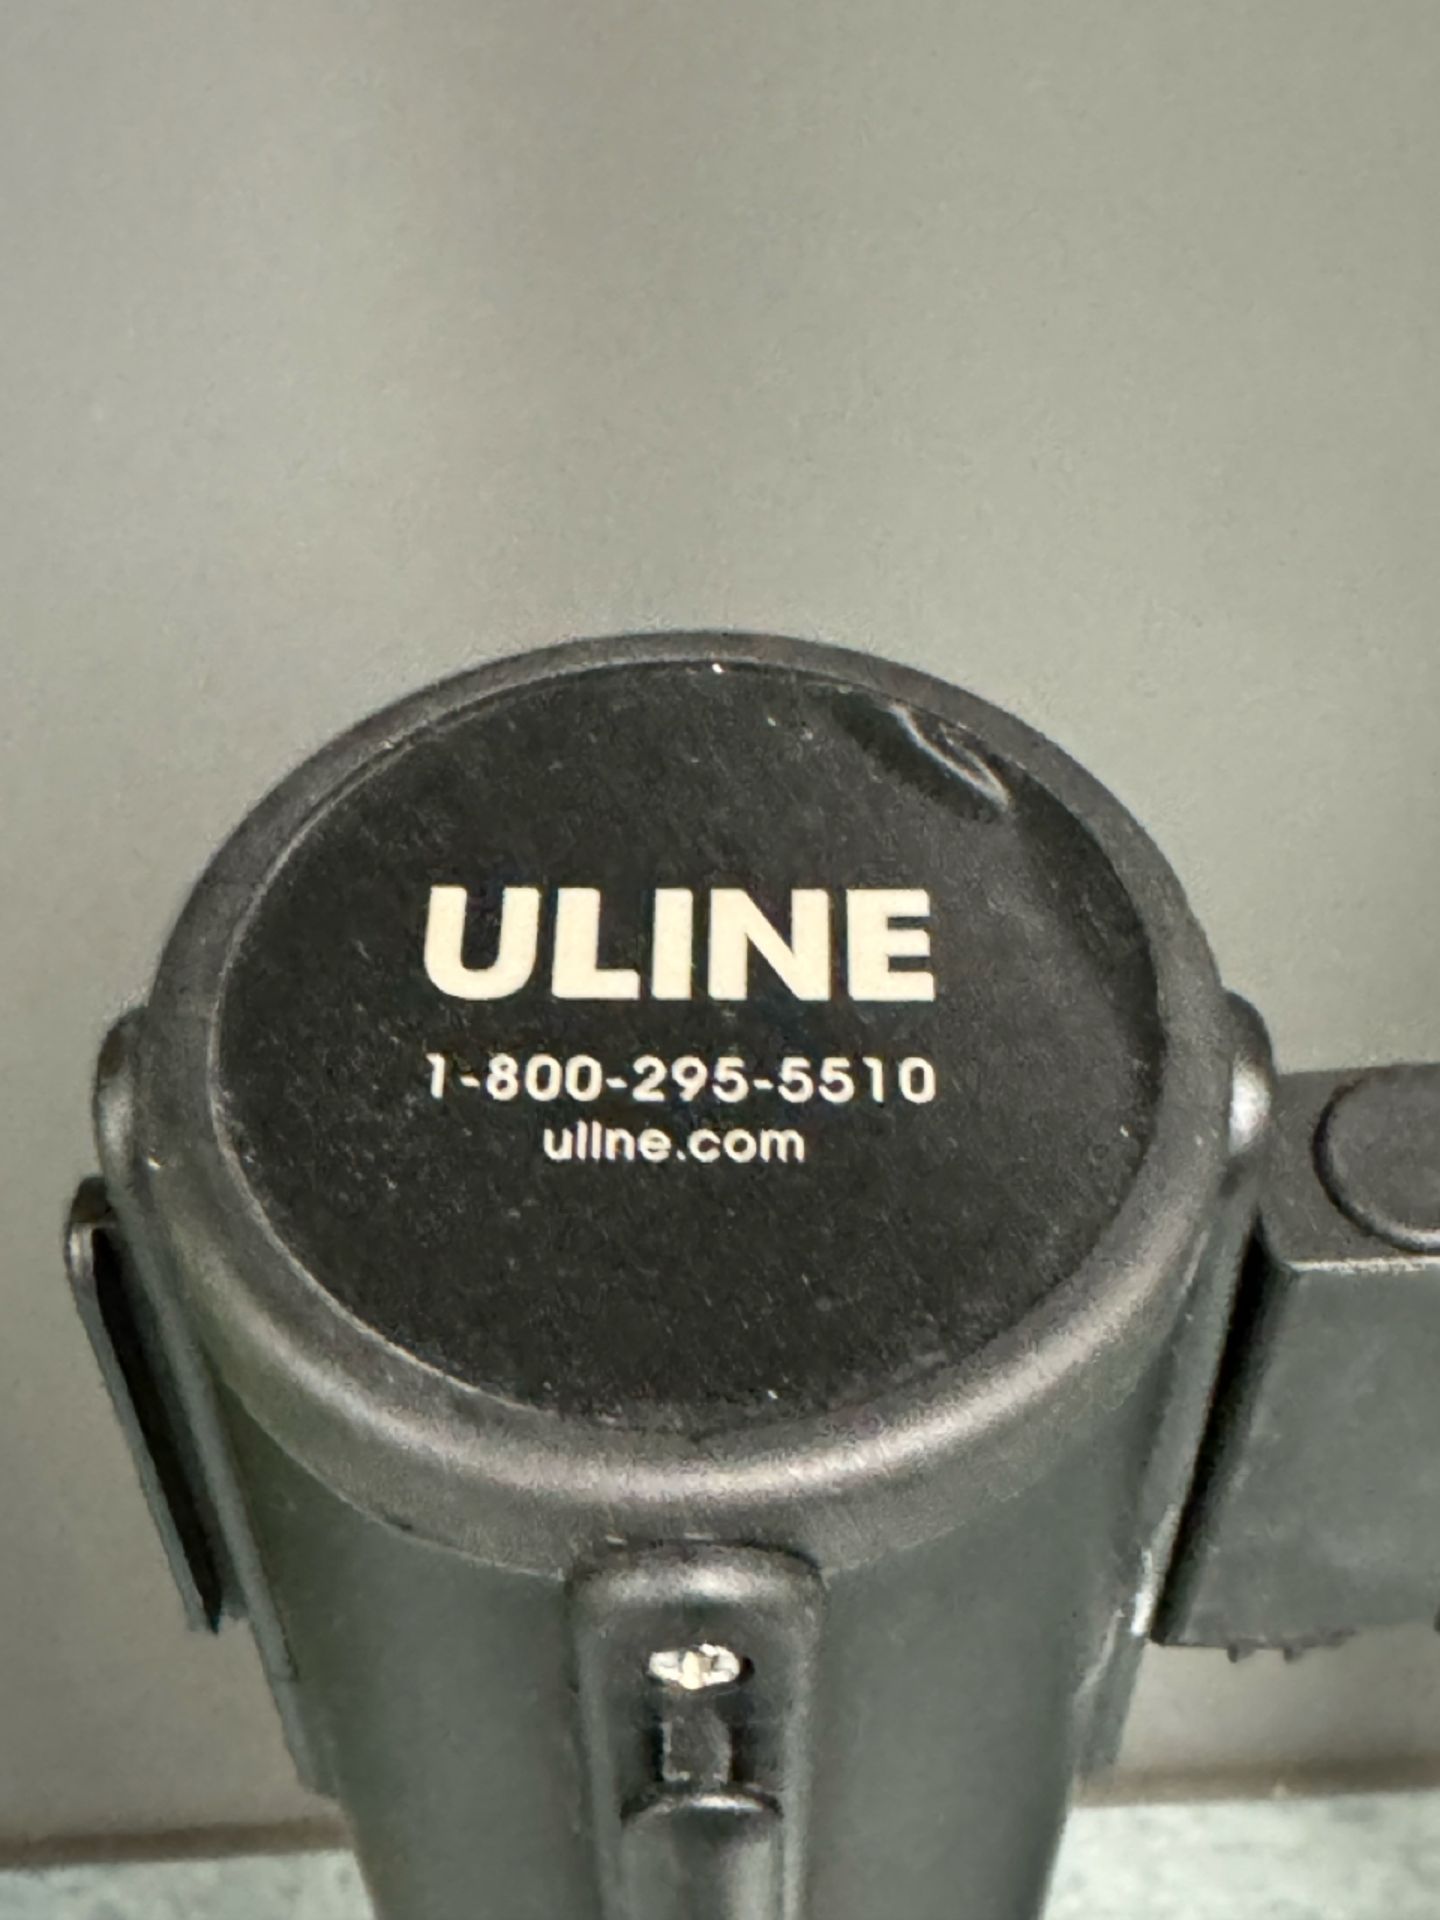 Uline Stanchions - Image 2 of 2